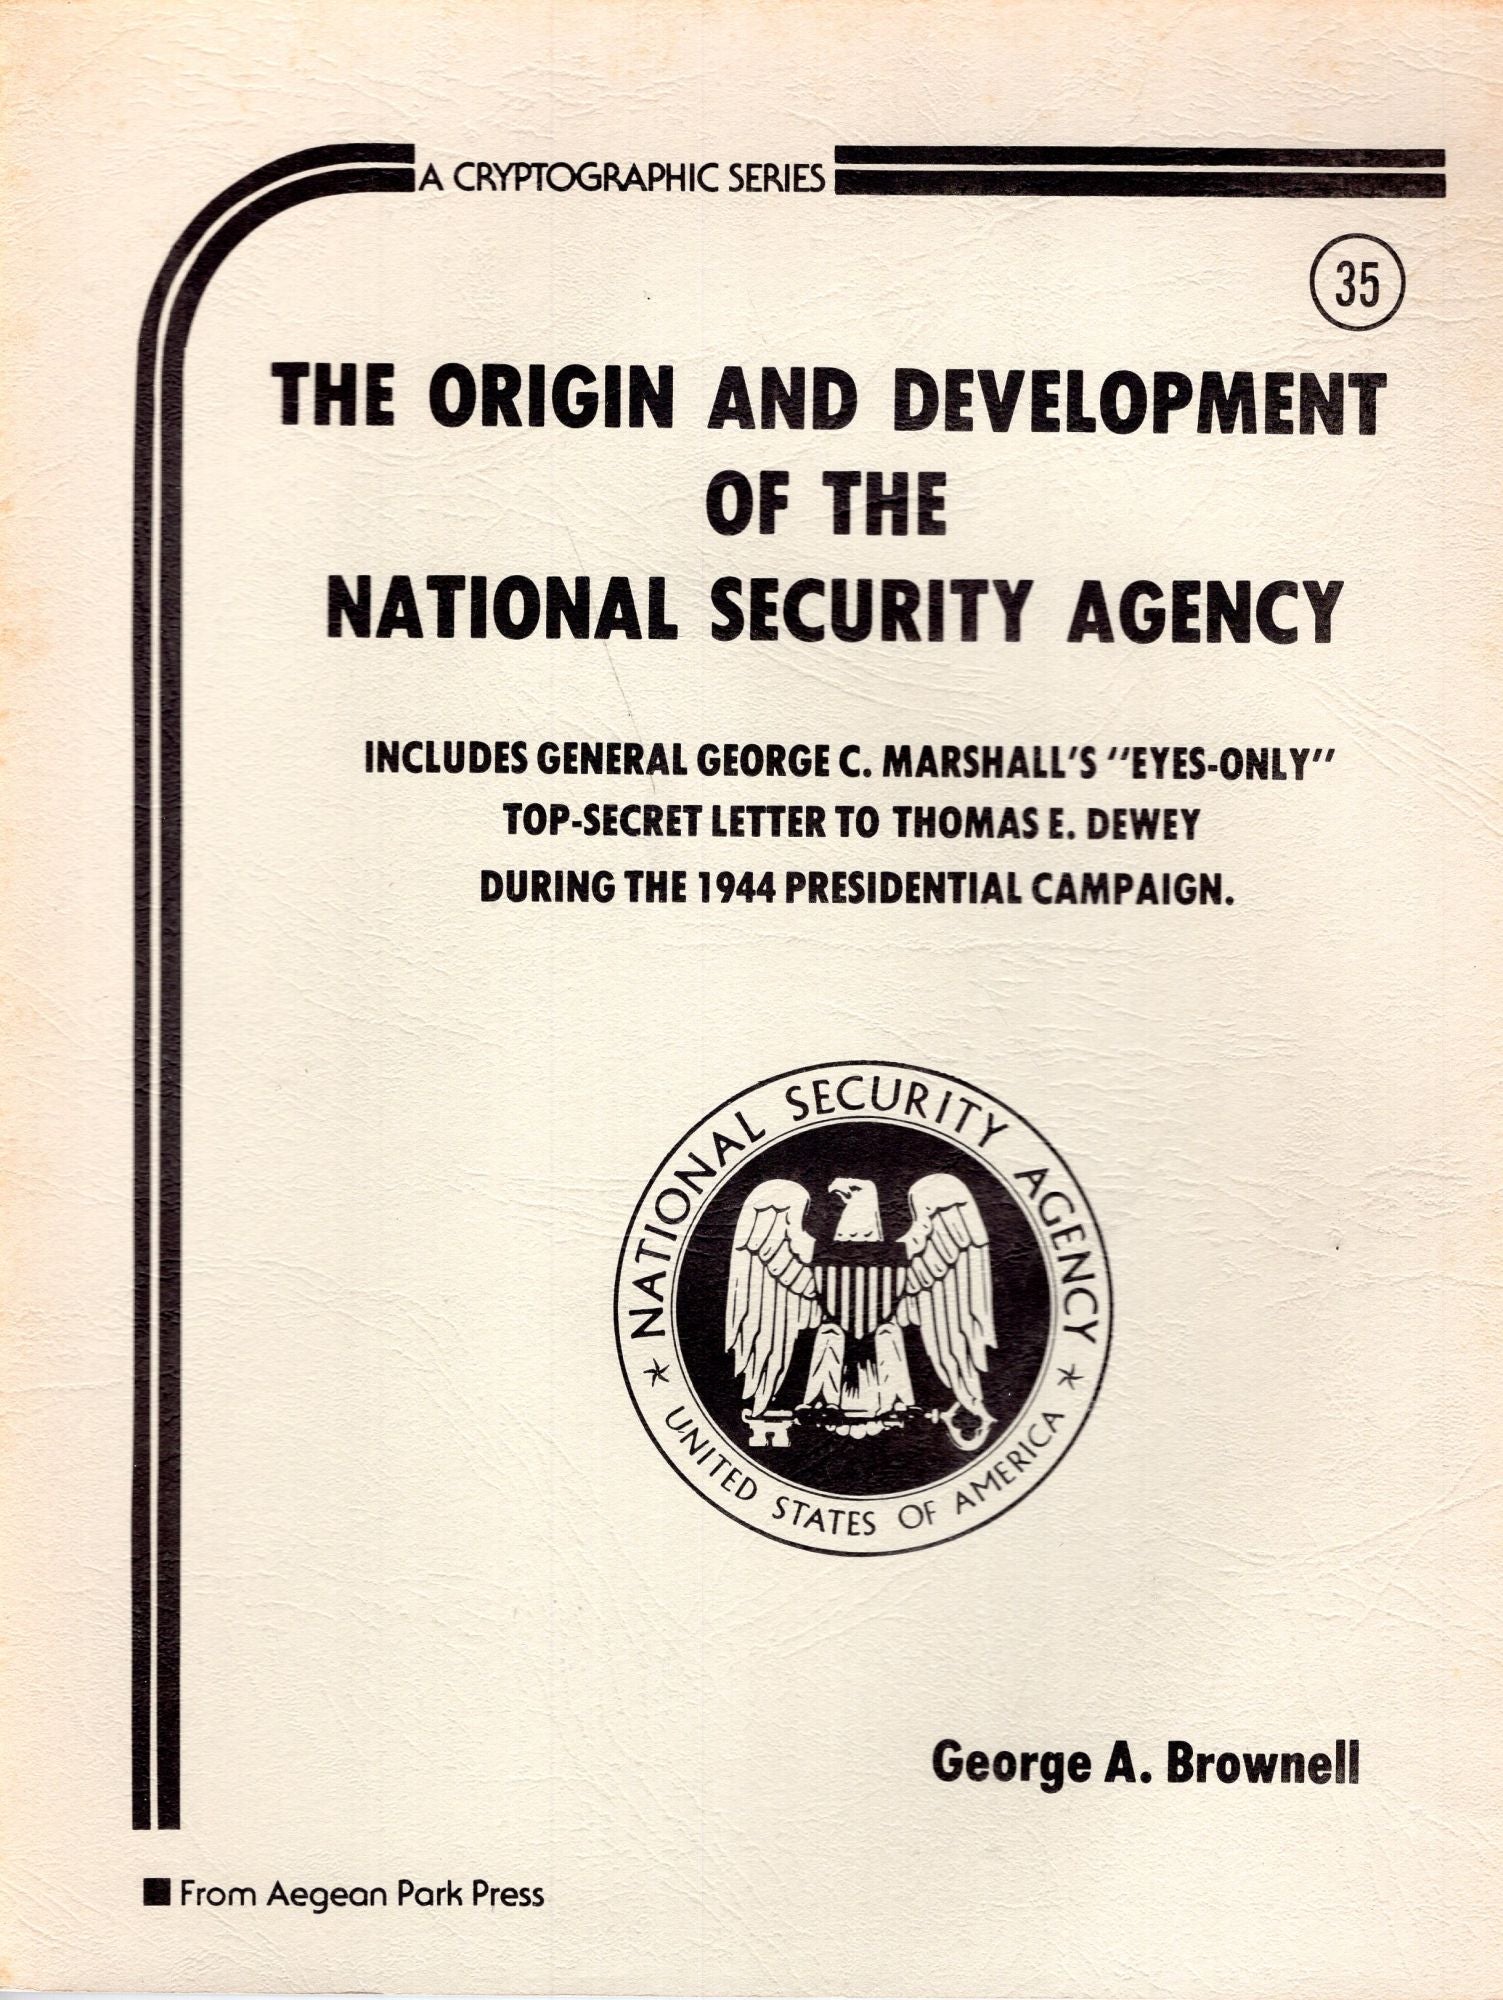 Origin and Development of the National Security Agency Cryptographic Series  #35 -- Includes General George C. Marshall's 'eyes-only' top-secret letter  